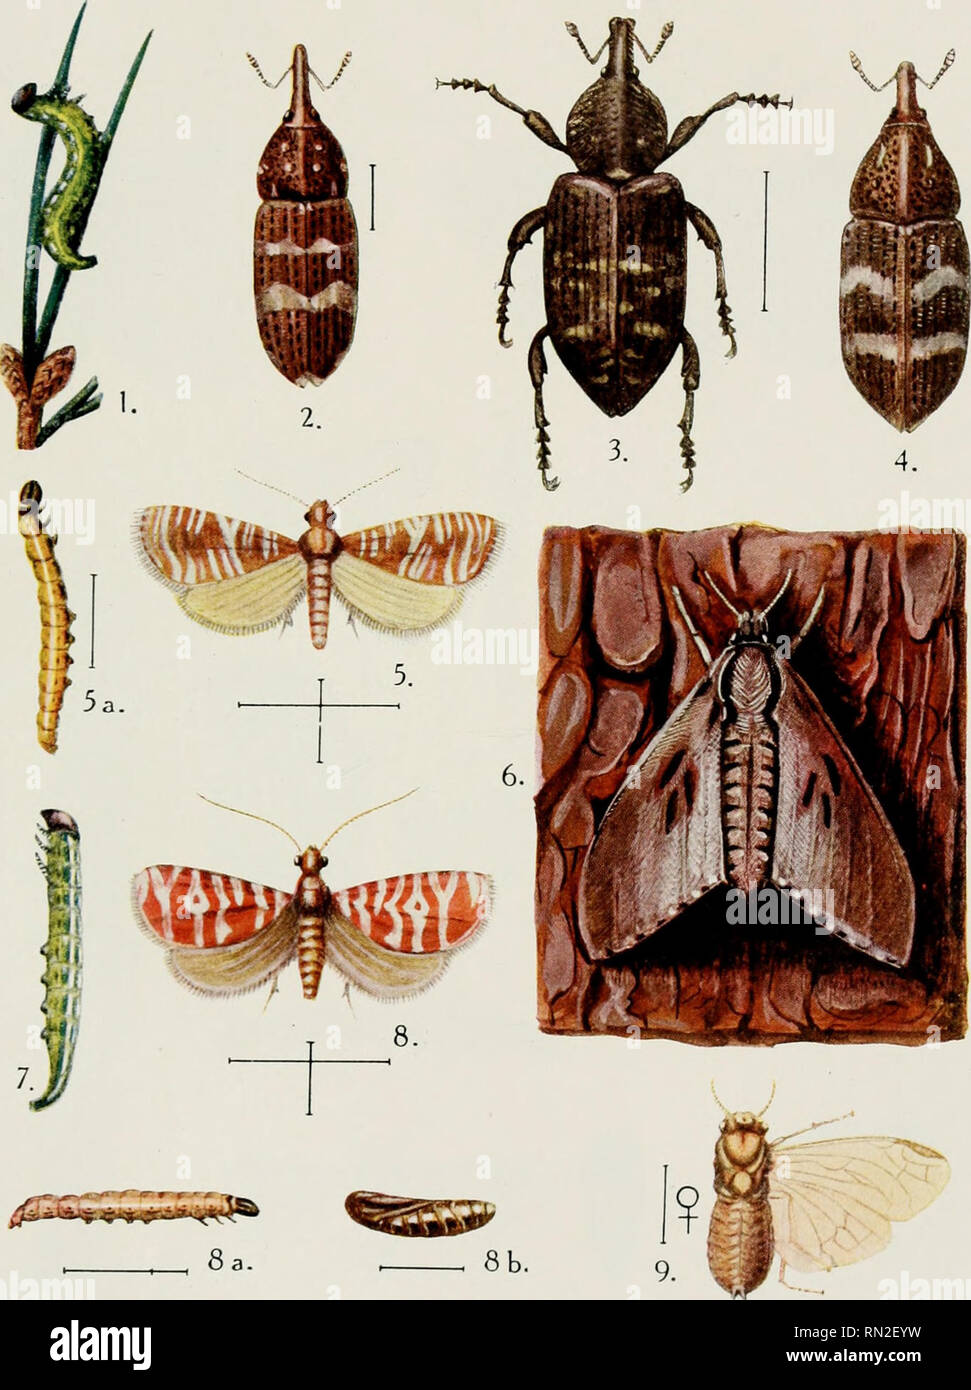 . Annales de la science agronomique franaise et trangre. Agriculture; Art -- France; Agriculture experiment stations -- France. Traité d'Entomologie Forestière PI. m.. A. BARBEY, del. ci pinx SADAG. imp. INSECTES DES PINS 1. Lophyrus pini L. — 2. Pissodes notatus F. — 3. Hylobius abietis L. — 4. Pissodes pinl L. ^ 5, 5a. Retinia turionana Hbn. — 6. Sphinx pinastri L. — 7. Noctua piniperda Panz. — 8,8a,8b. Retinia buoliana Schiff. — 9. Lophyrus ruius Rtzb.. Please note that these images are extracted from scanned page images that may have been digitally enhanced for readability - coloration and Stock Photo